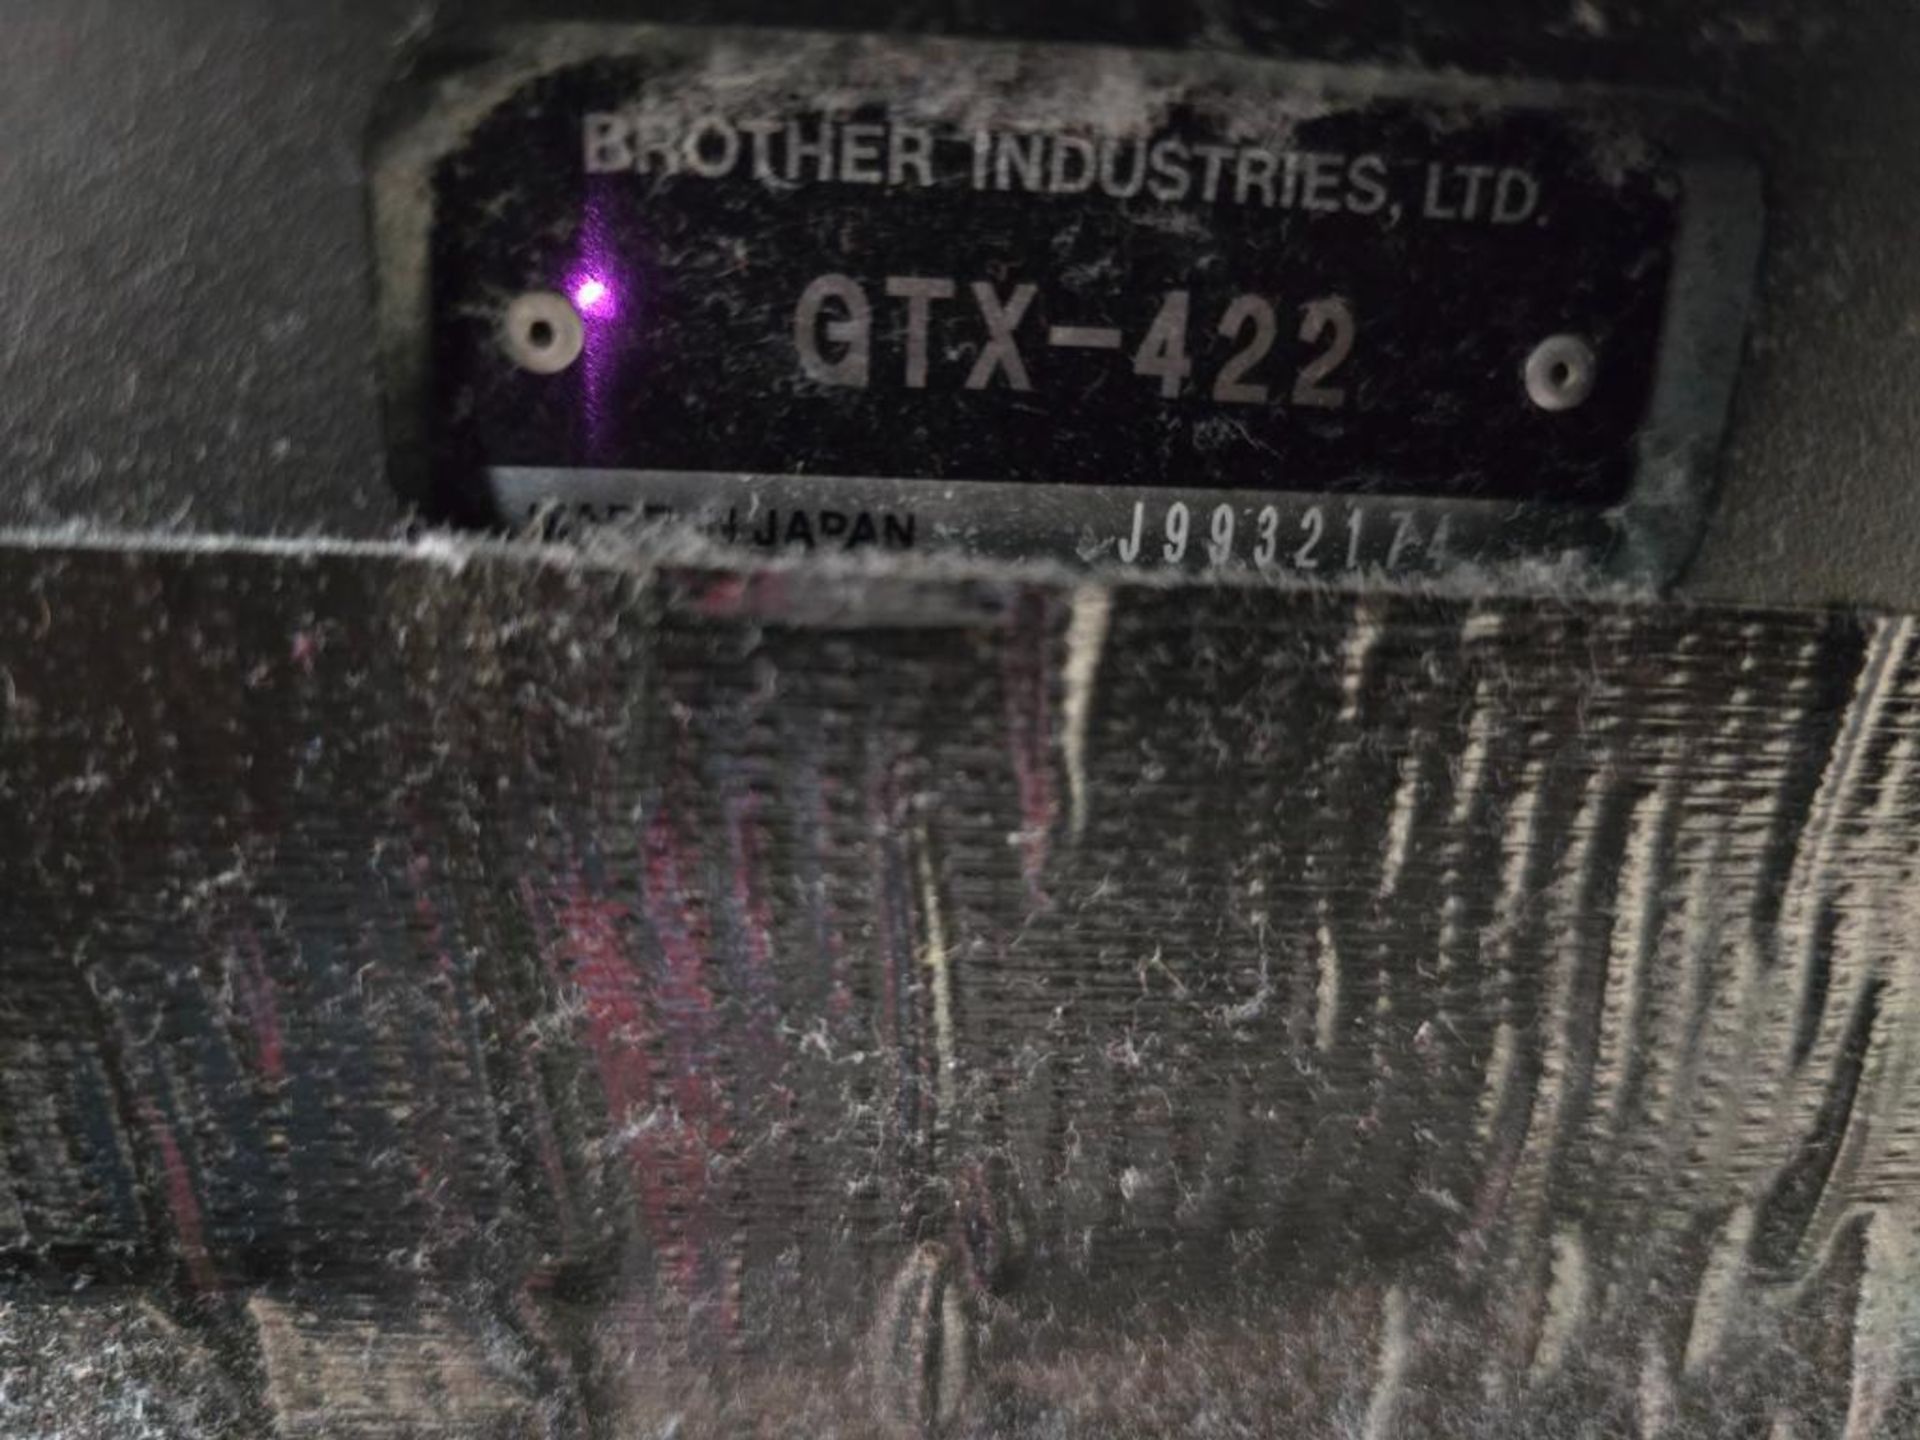 2018 Brother GTX-422 DTG (Direct to Garment) Printer, Twin Head, 6-Color, Water Based Pigmented Ink, - Image 5 of 10